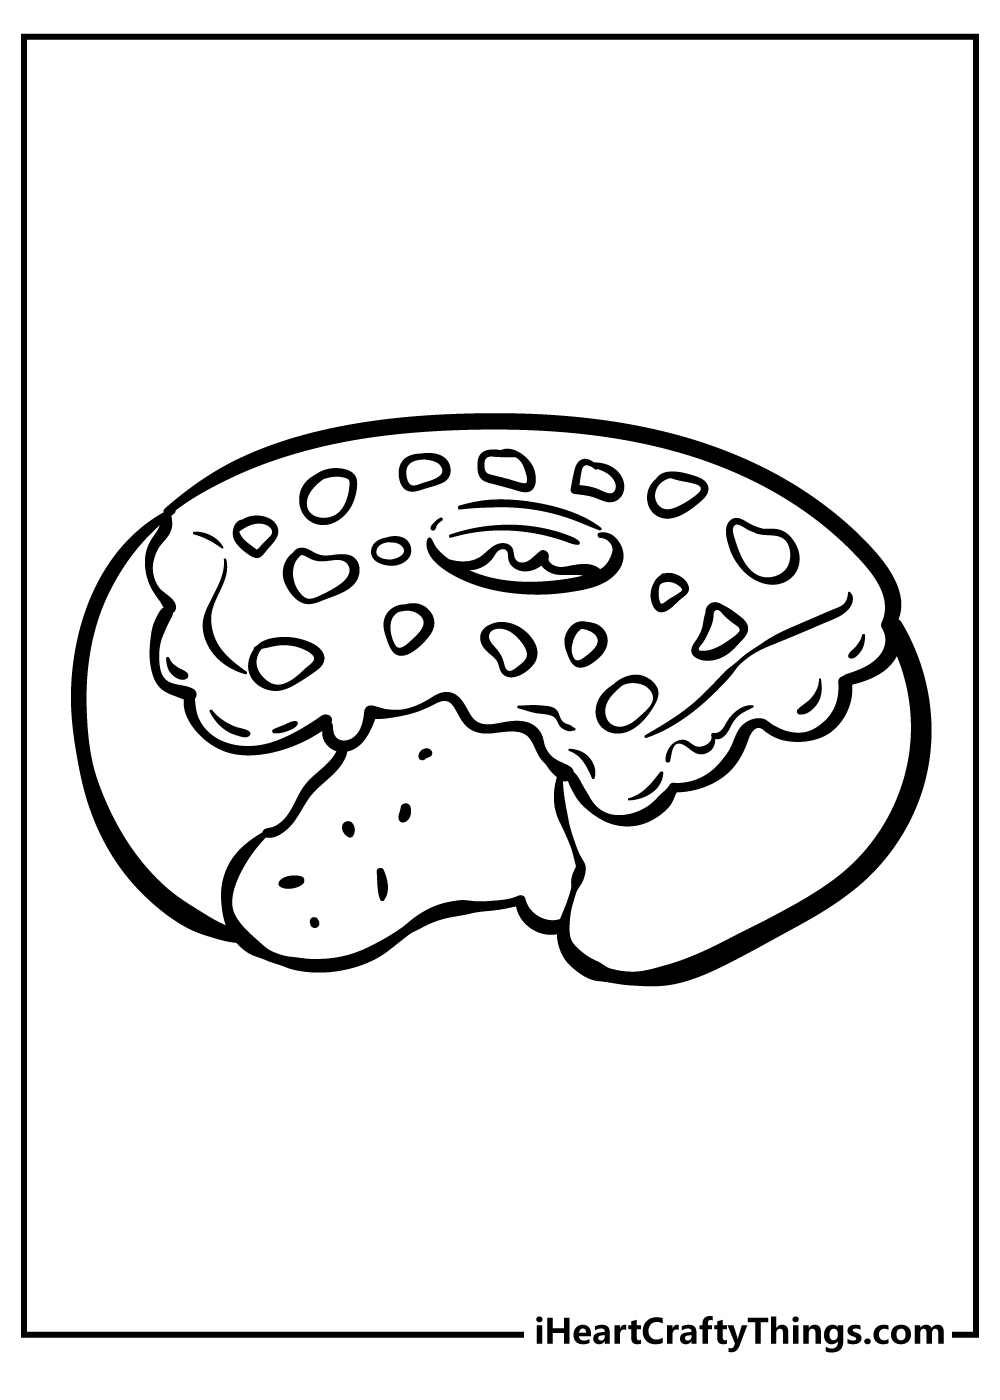 Donut Coloring Pages free pdf download